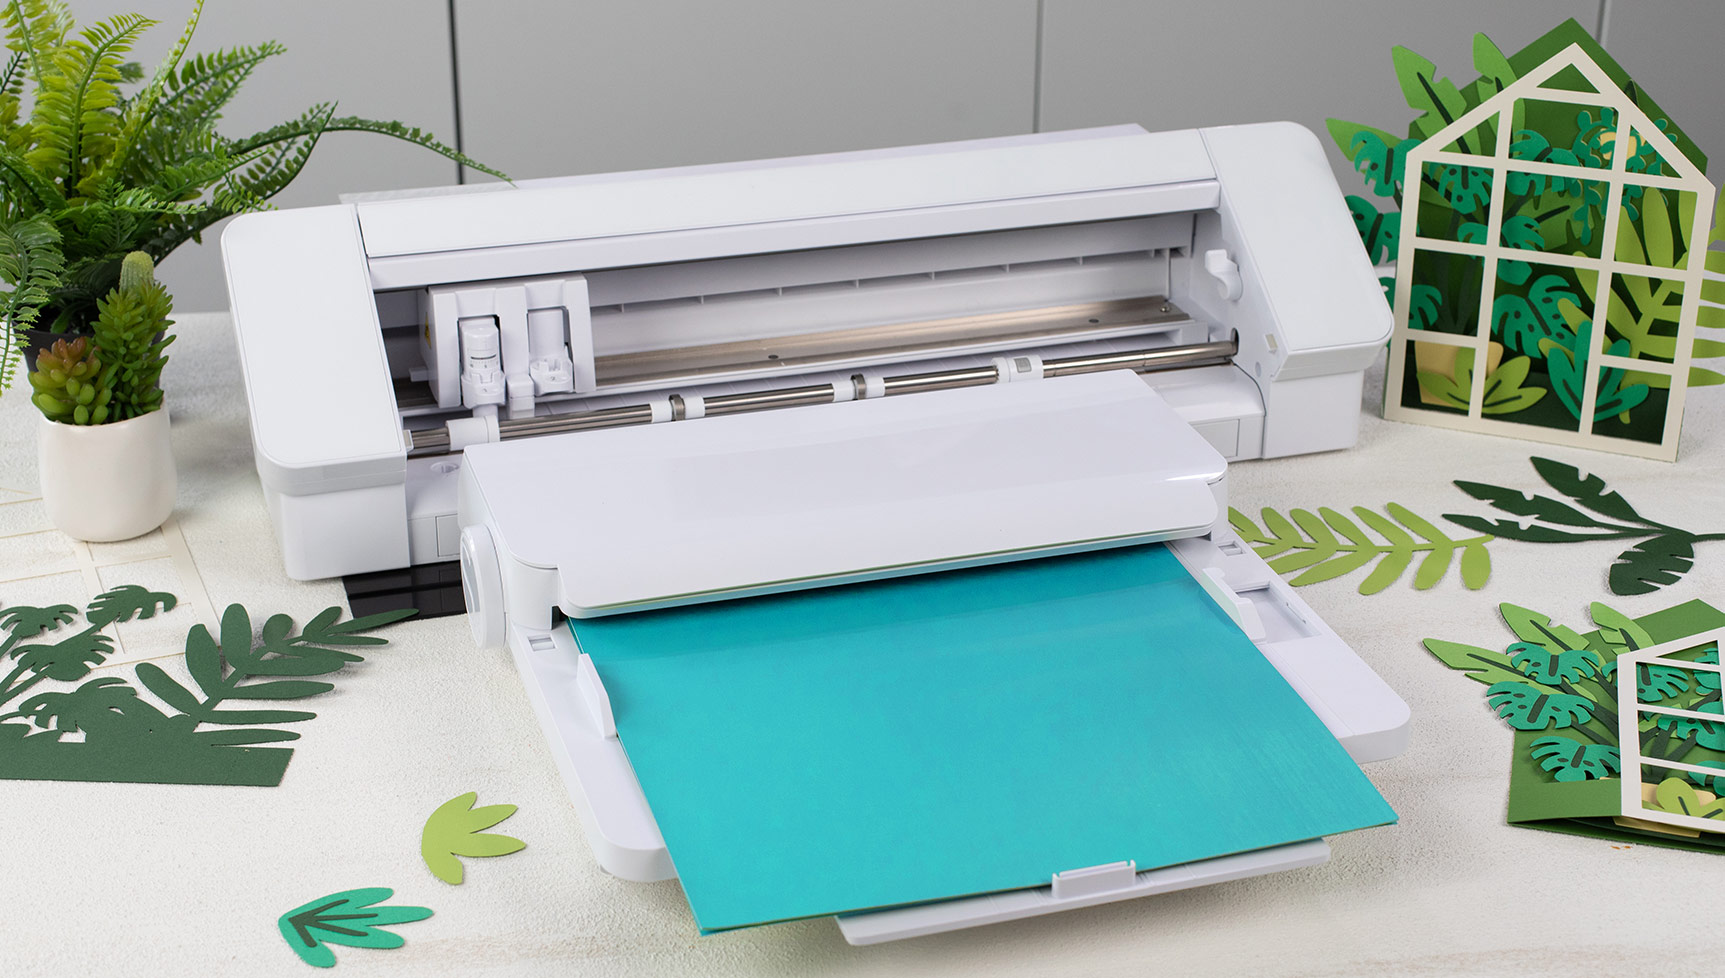 Create Even More With The Silhouette Auto Sheet Feeder